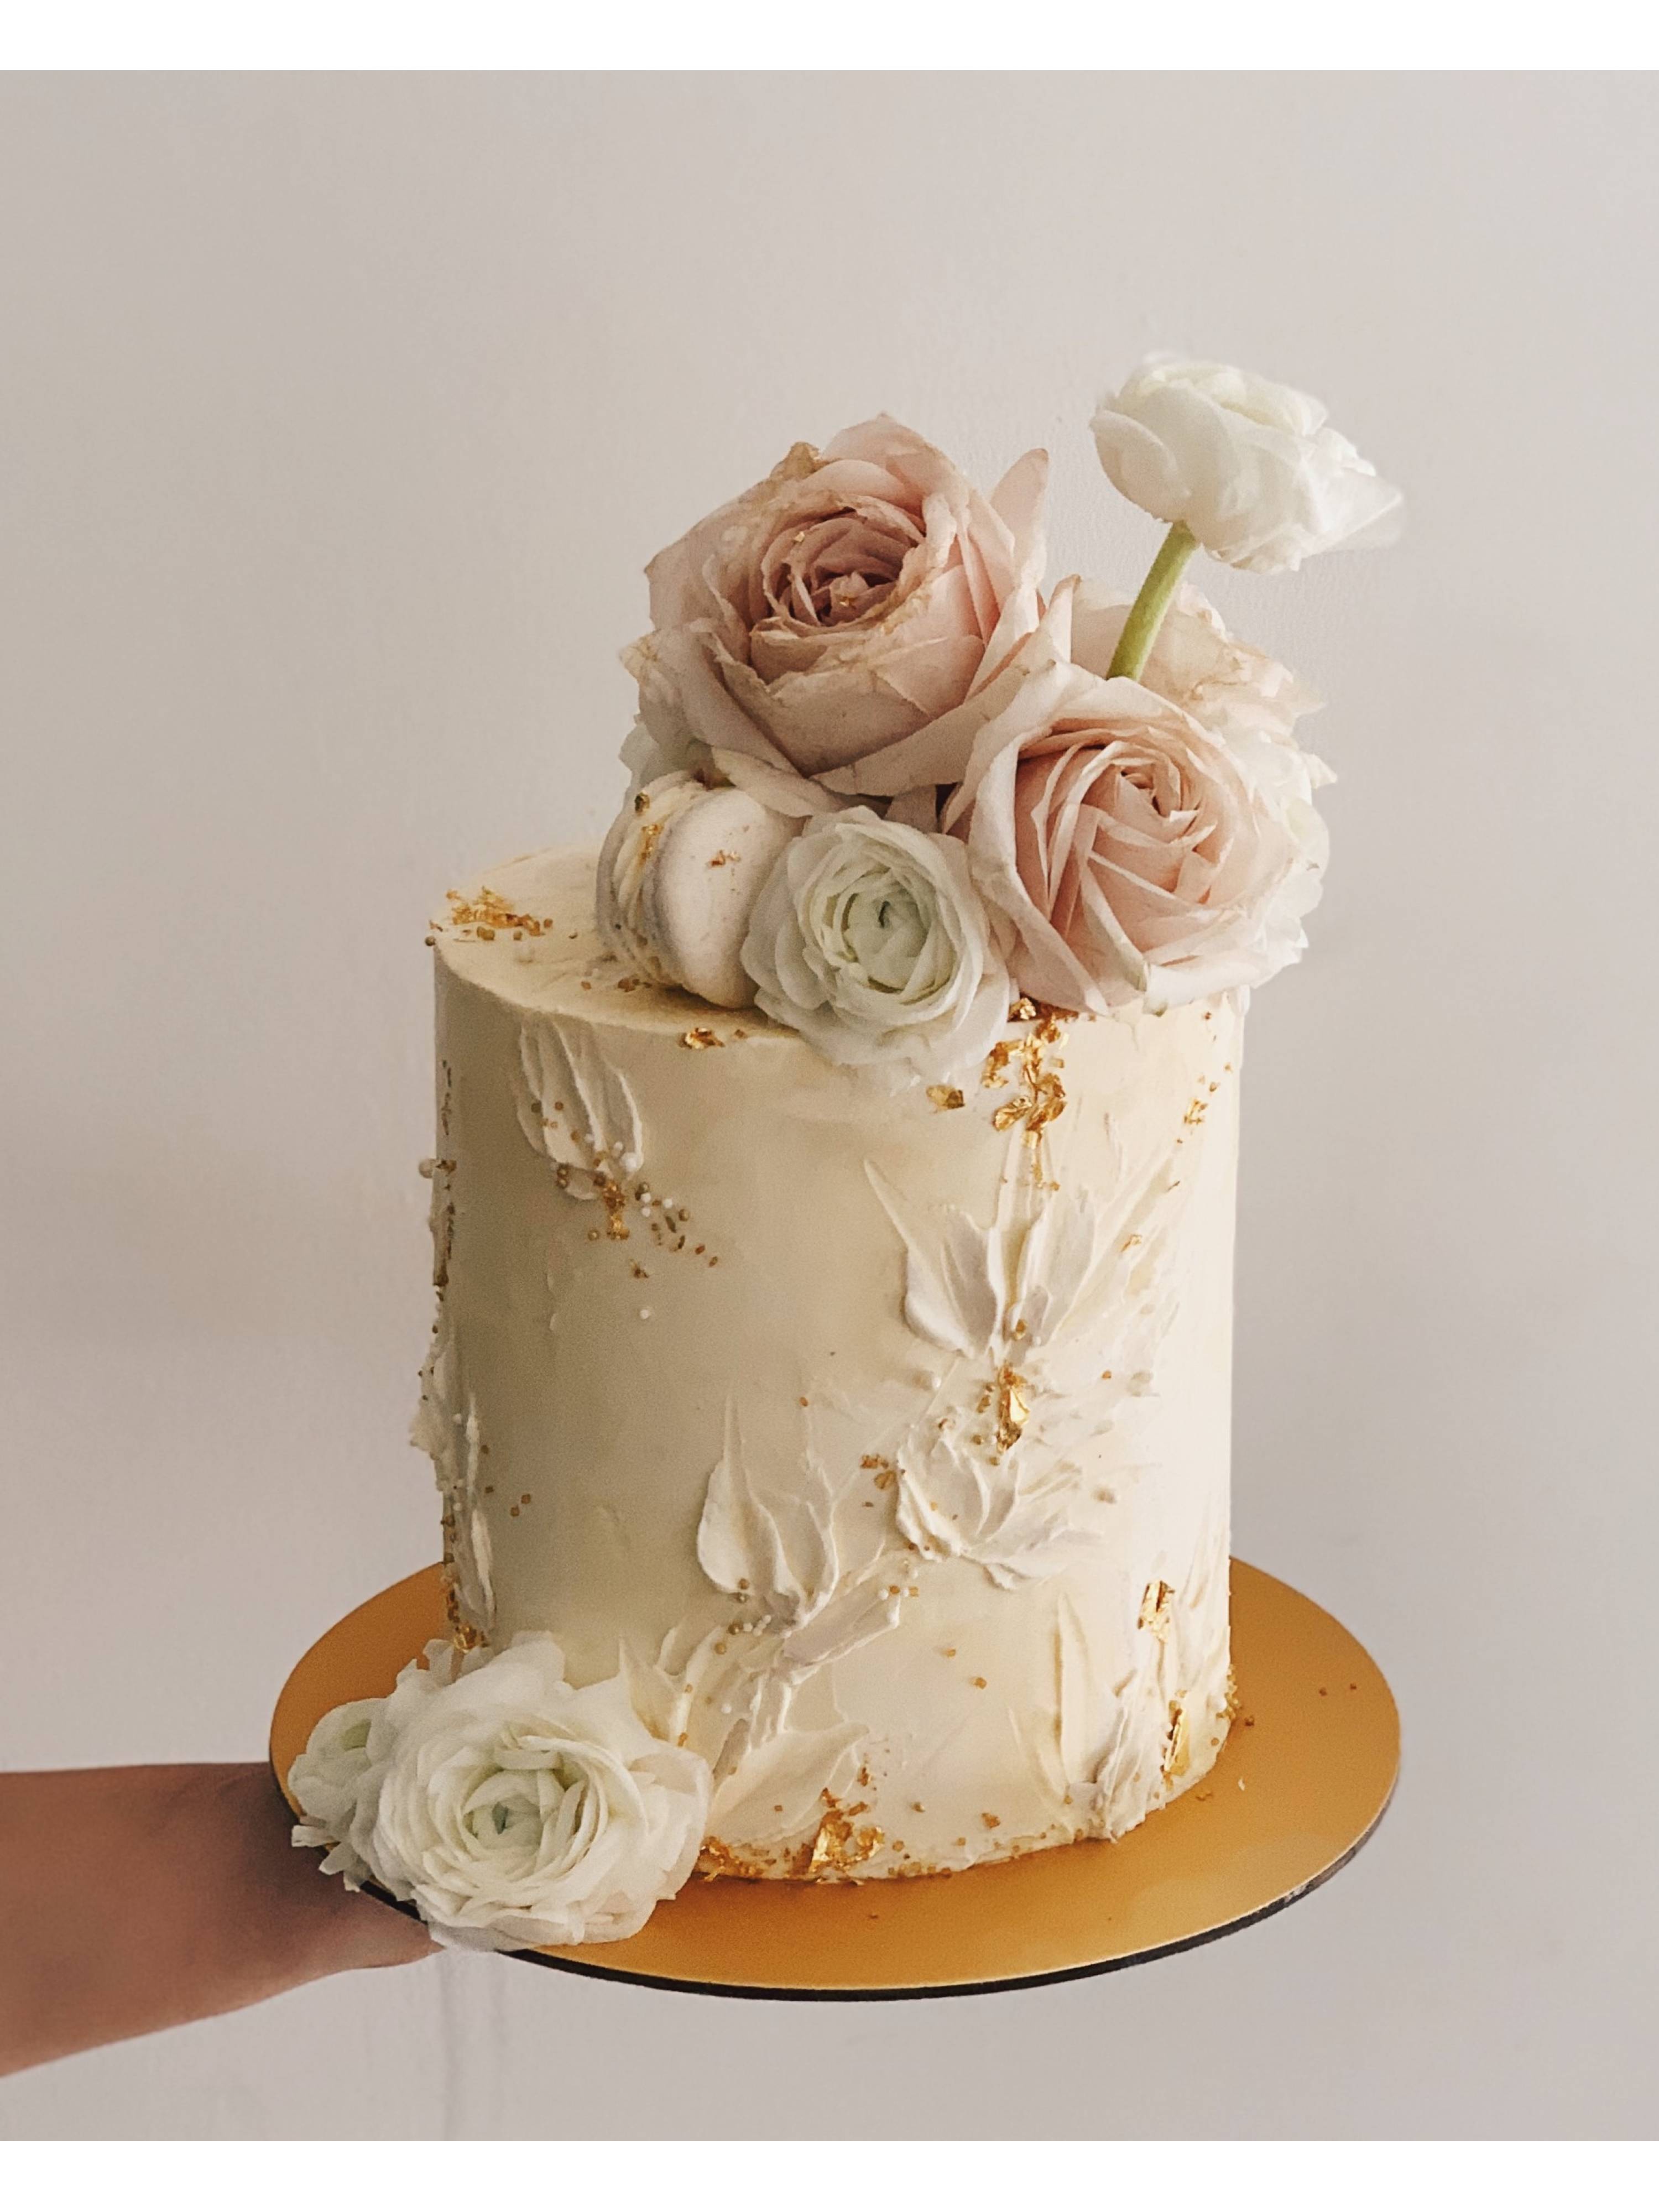 F26. Abstract White Nude Floral Cake